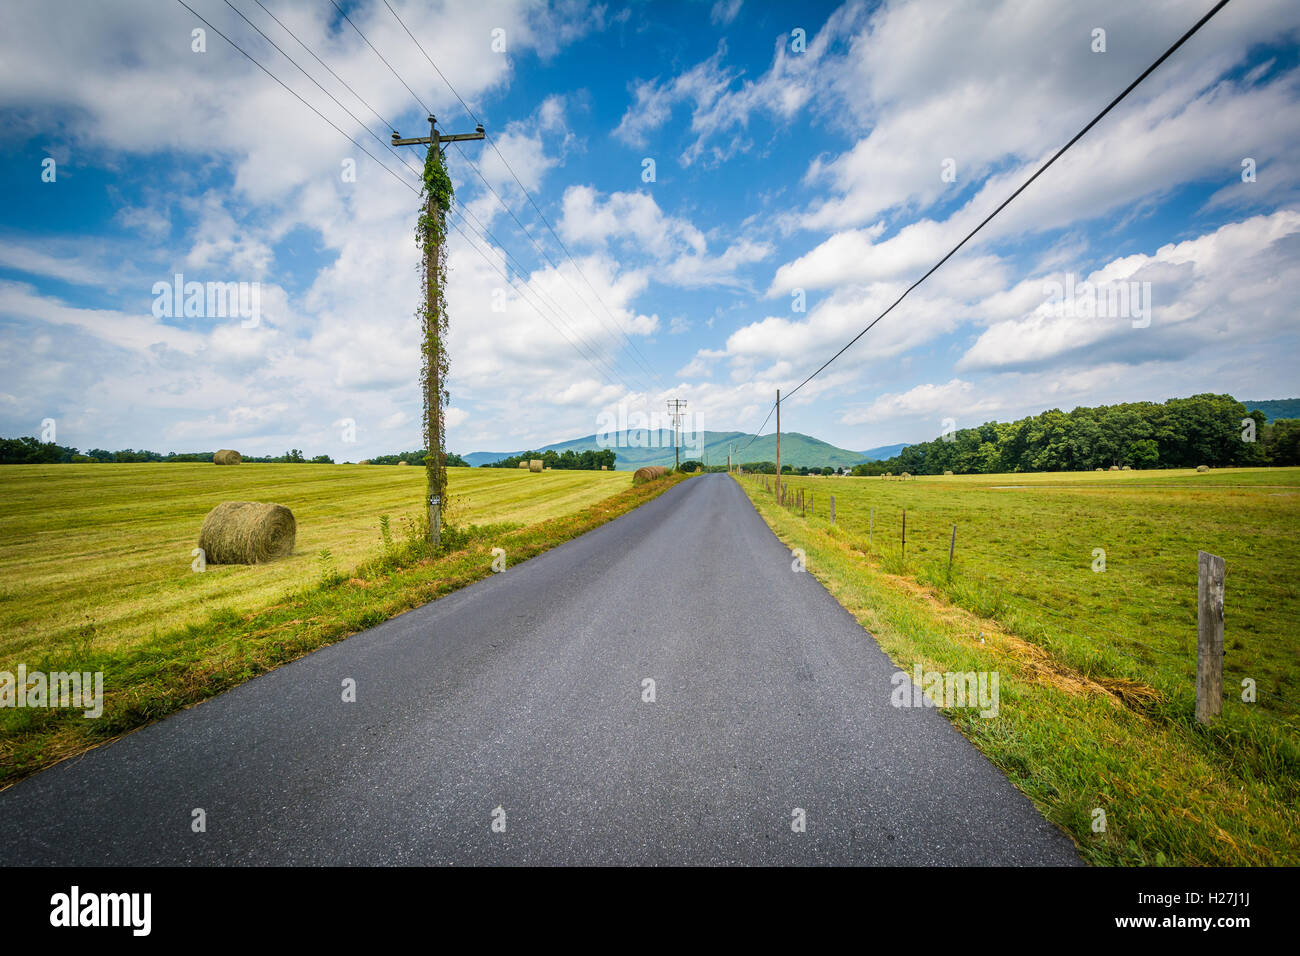 Country road with distant mountains and farm fields in the rural Shenandoah Valley, Virginia. Stock Photo